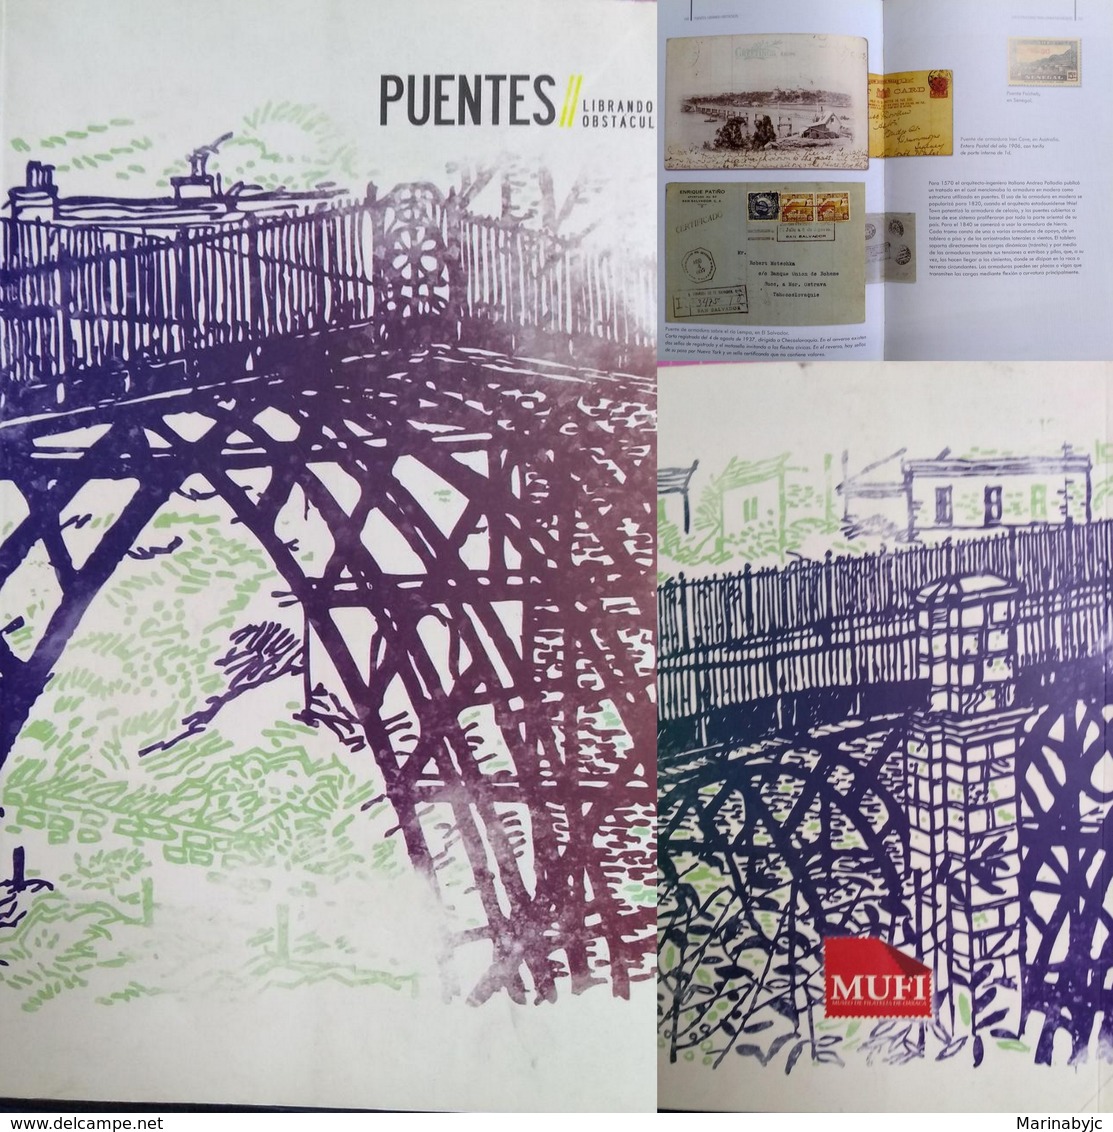 J) 2009 MEXICO, BOOK OF BRIDGES, COLOR FULL, VERSION IN SPANISH, 293 PAGES, XF - Mexico